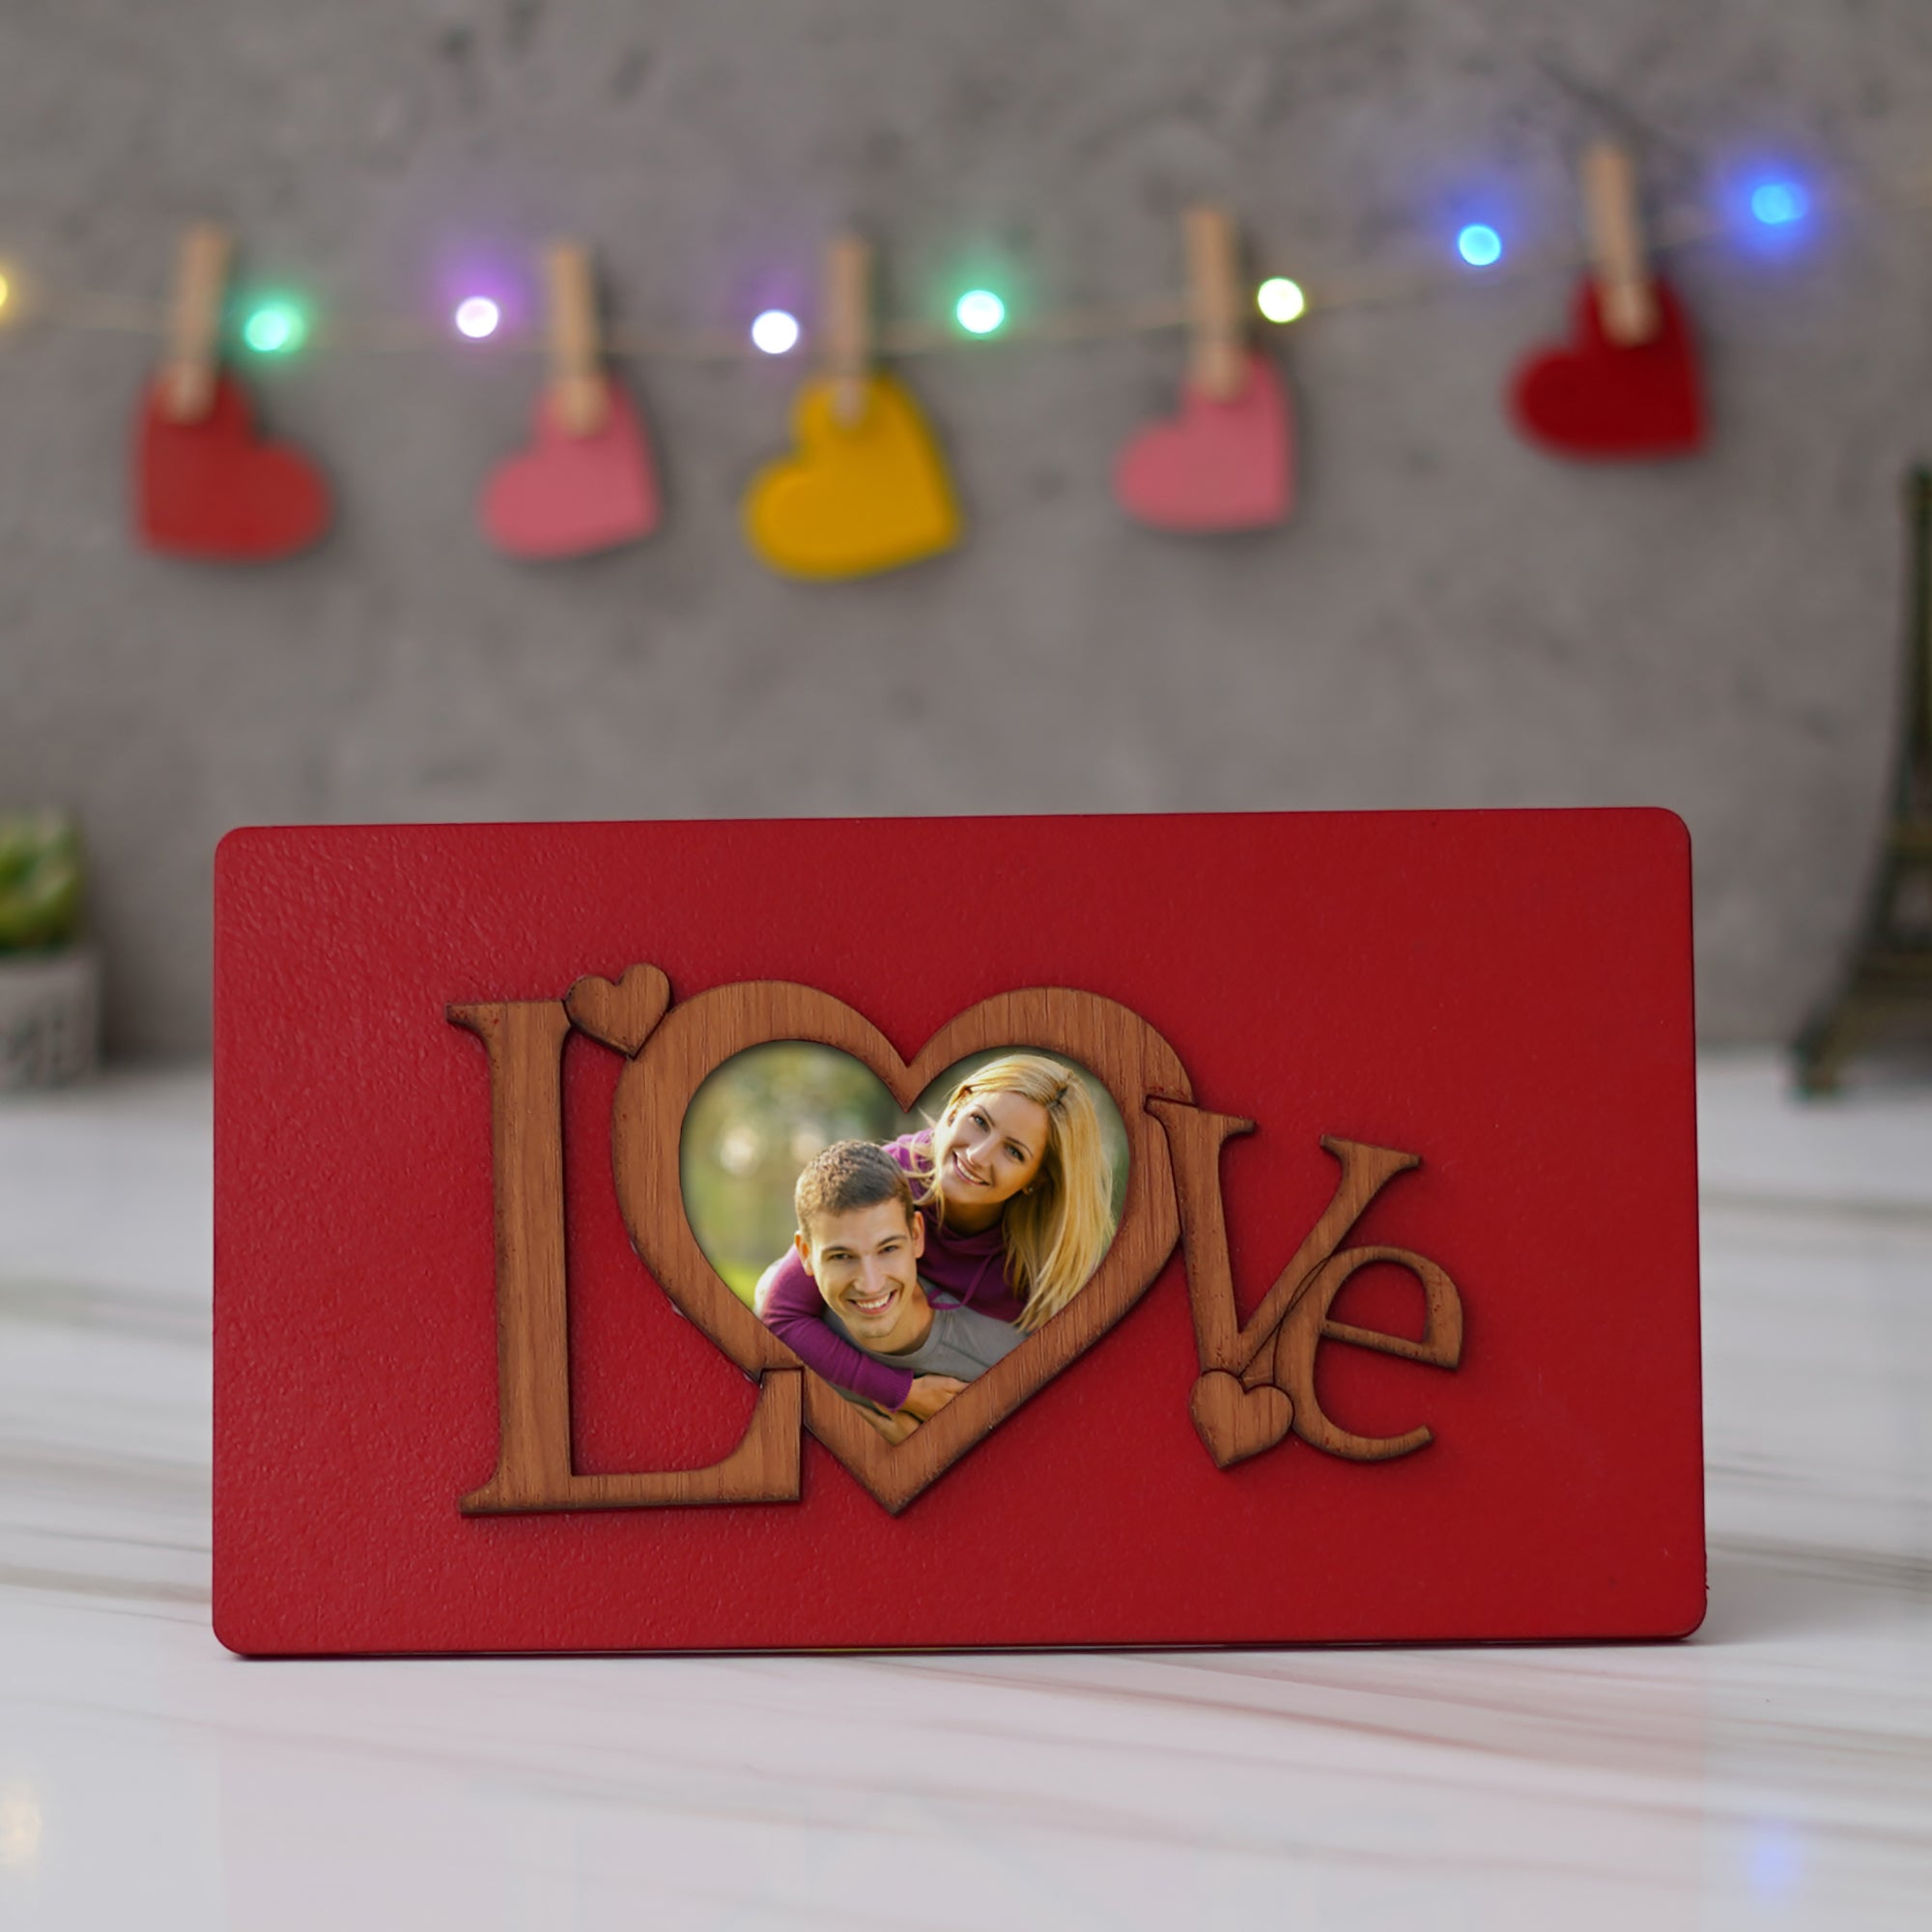 Valentine Combo of Pack of 8 Love Gift Cards, "Love" Wooden Photo Frame With Red Stand, Heart Shaped Gift Box Set with White Teddy and Red Roses 3